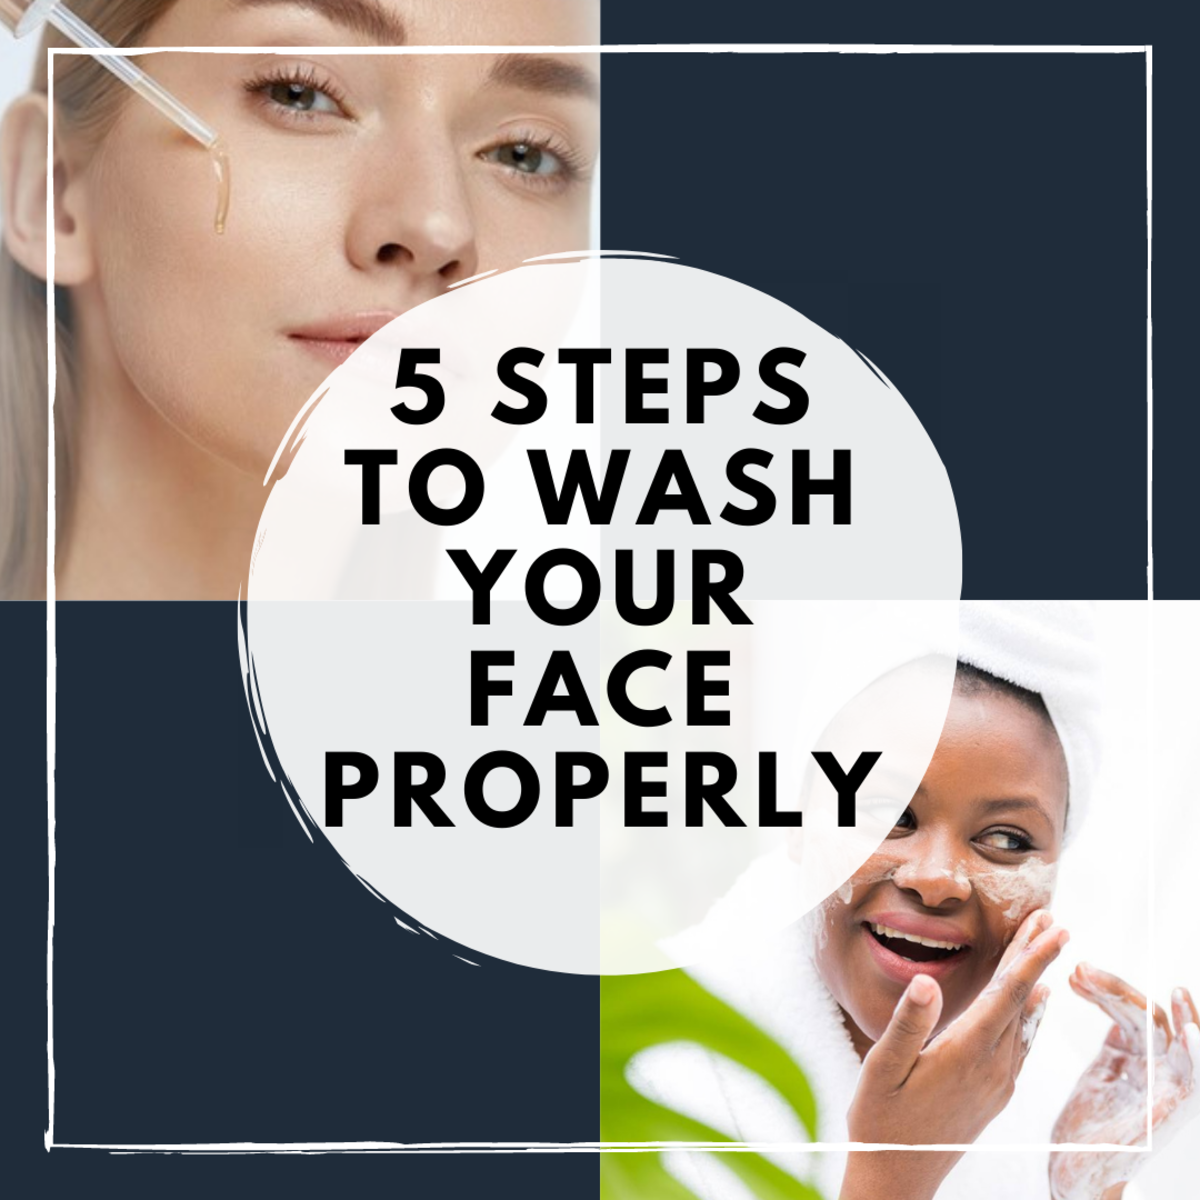 5 Steps to Washing Your Face Properly: The Correct Order